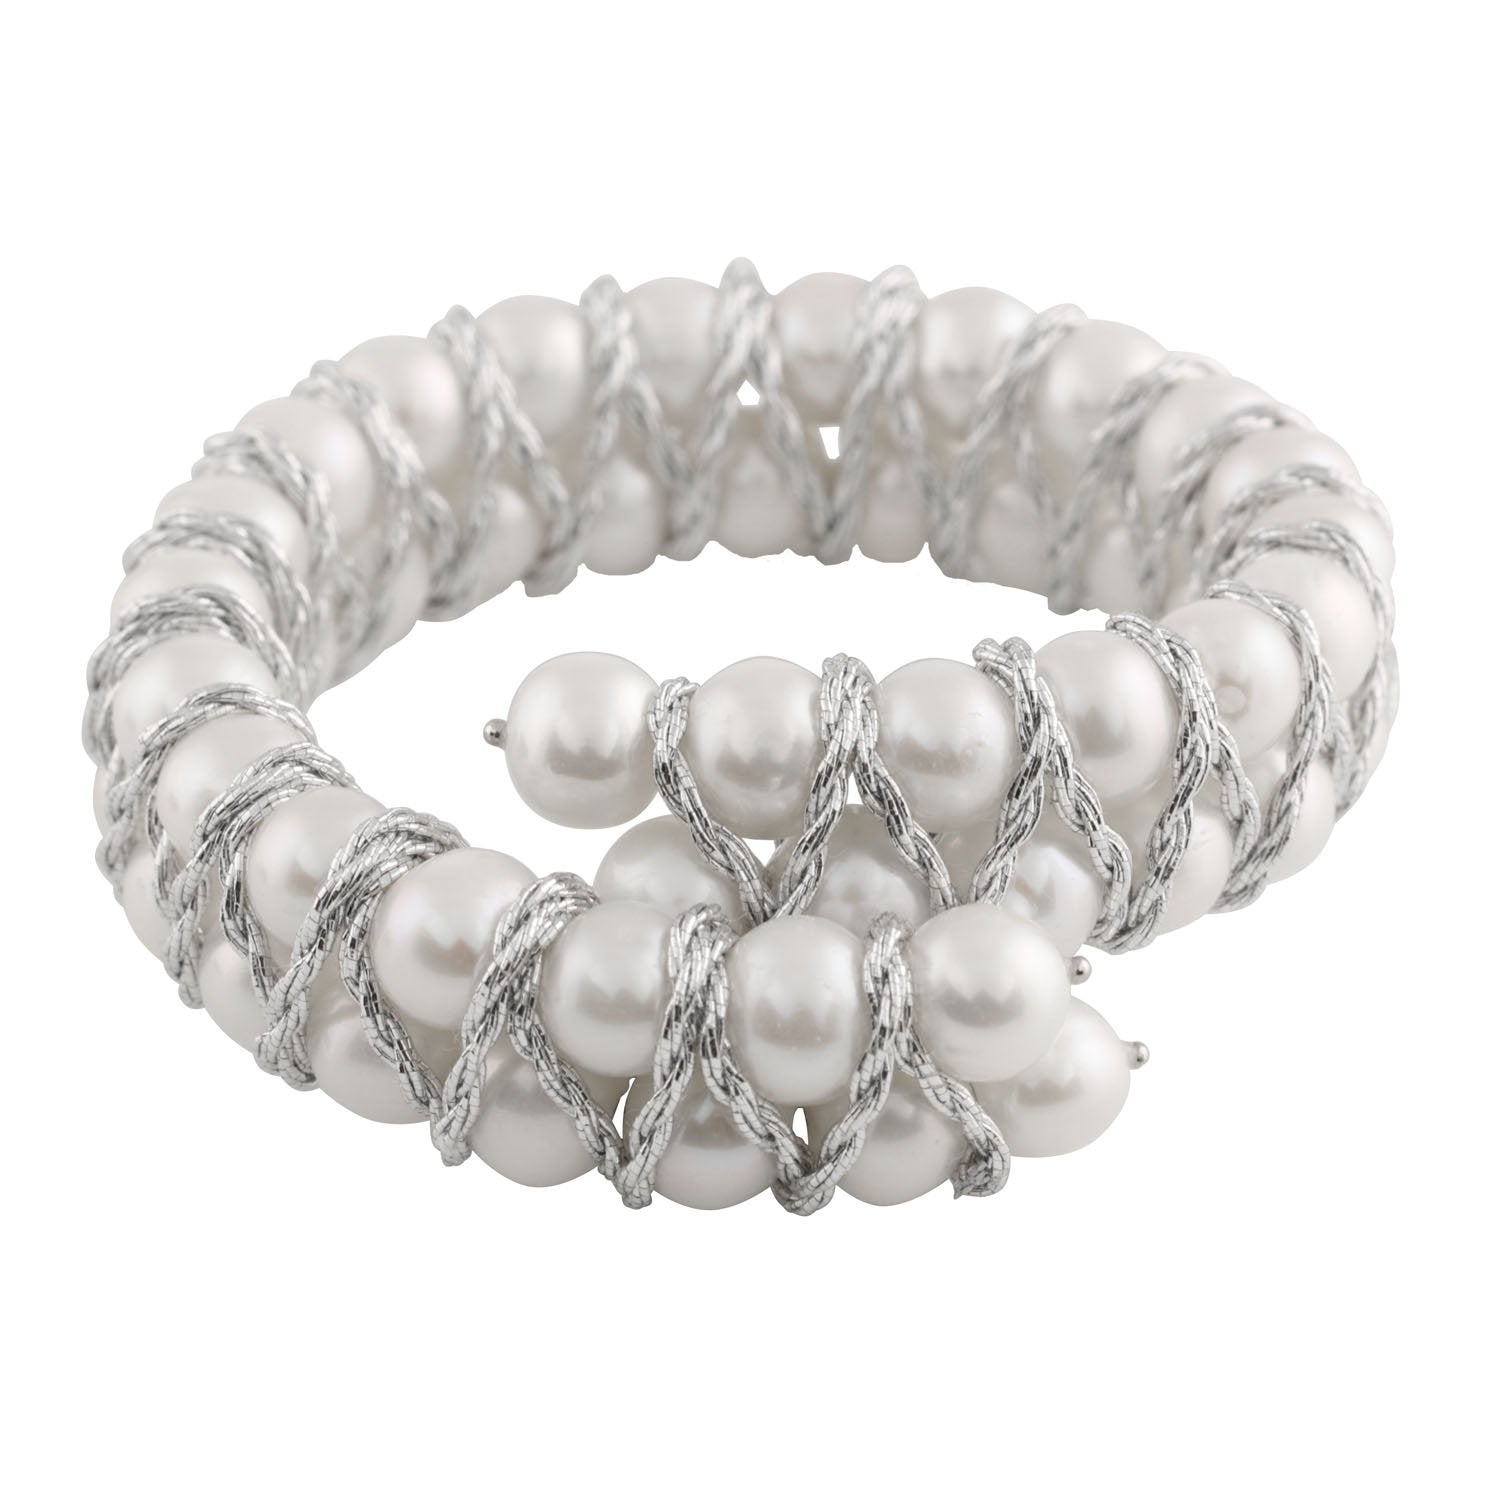 Hand Braided Sterling Silver Pearl Bangle